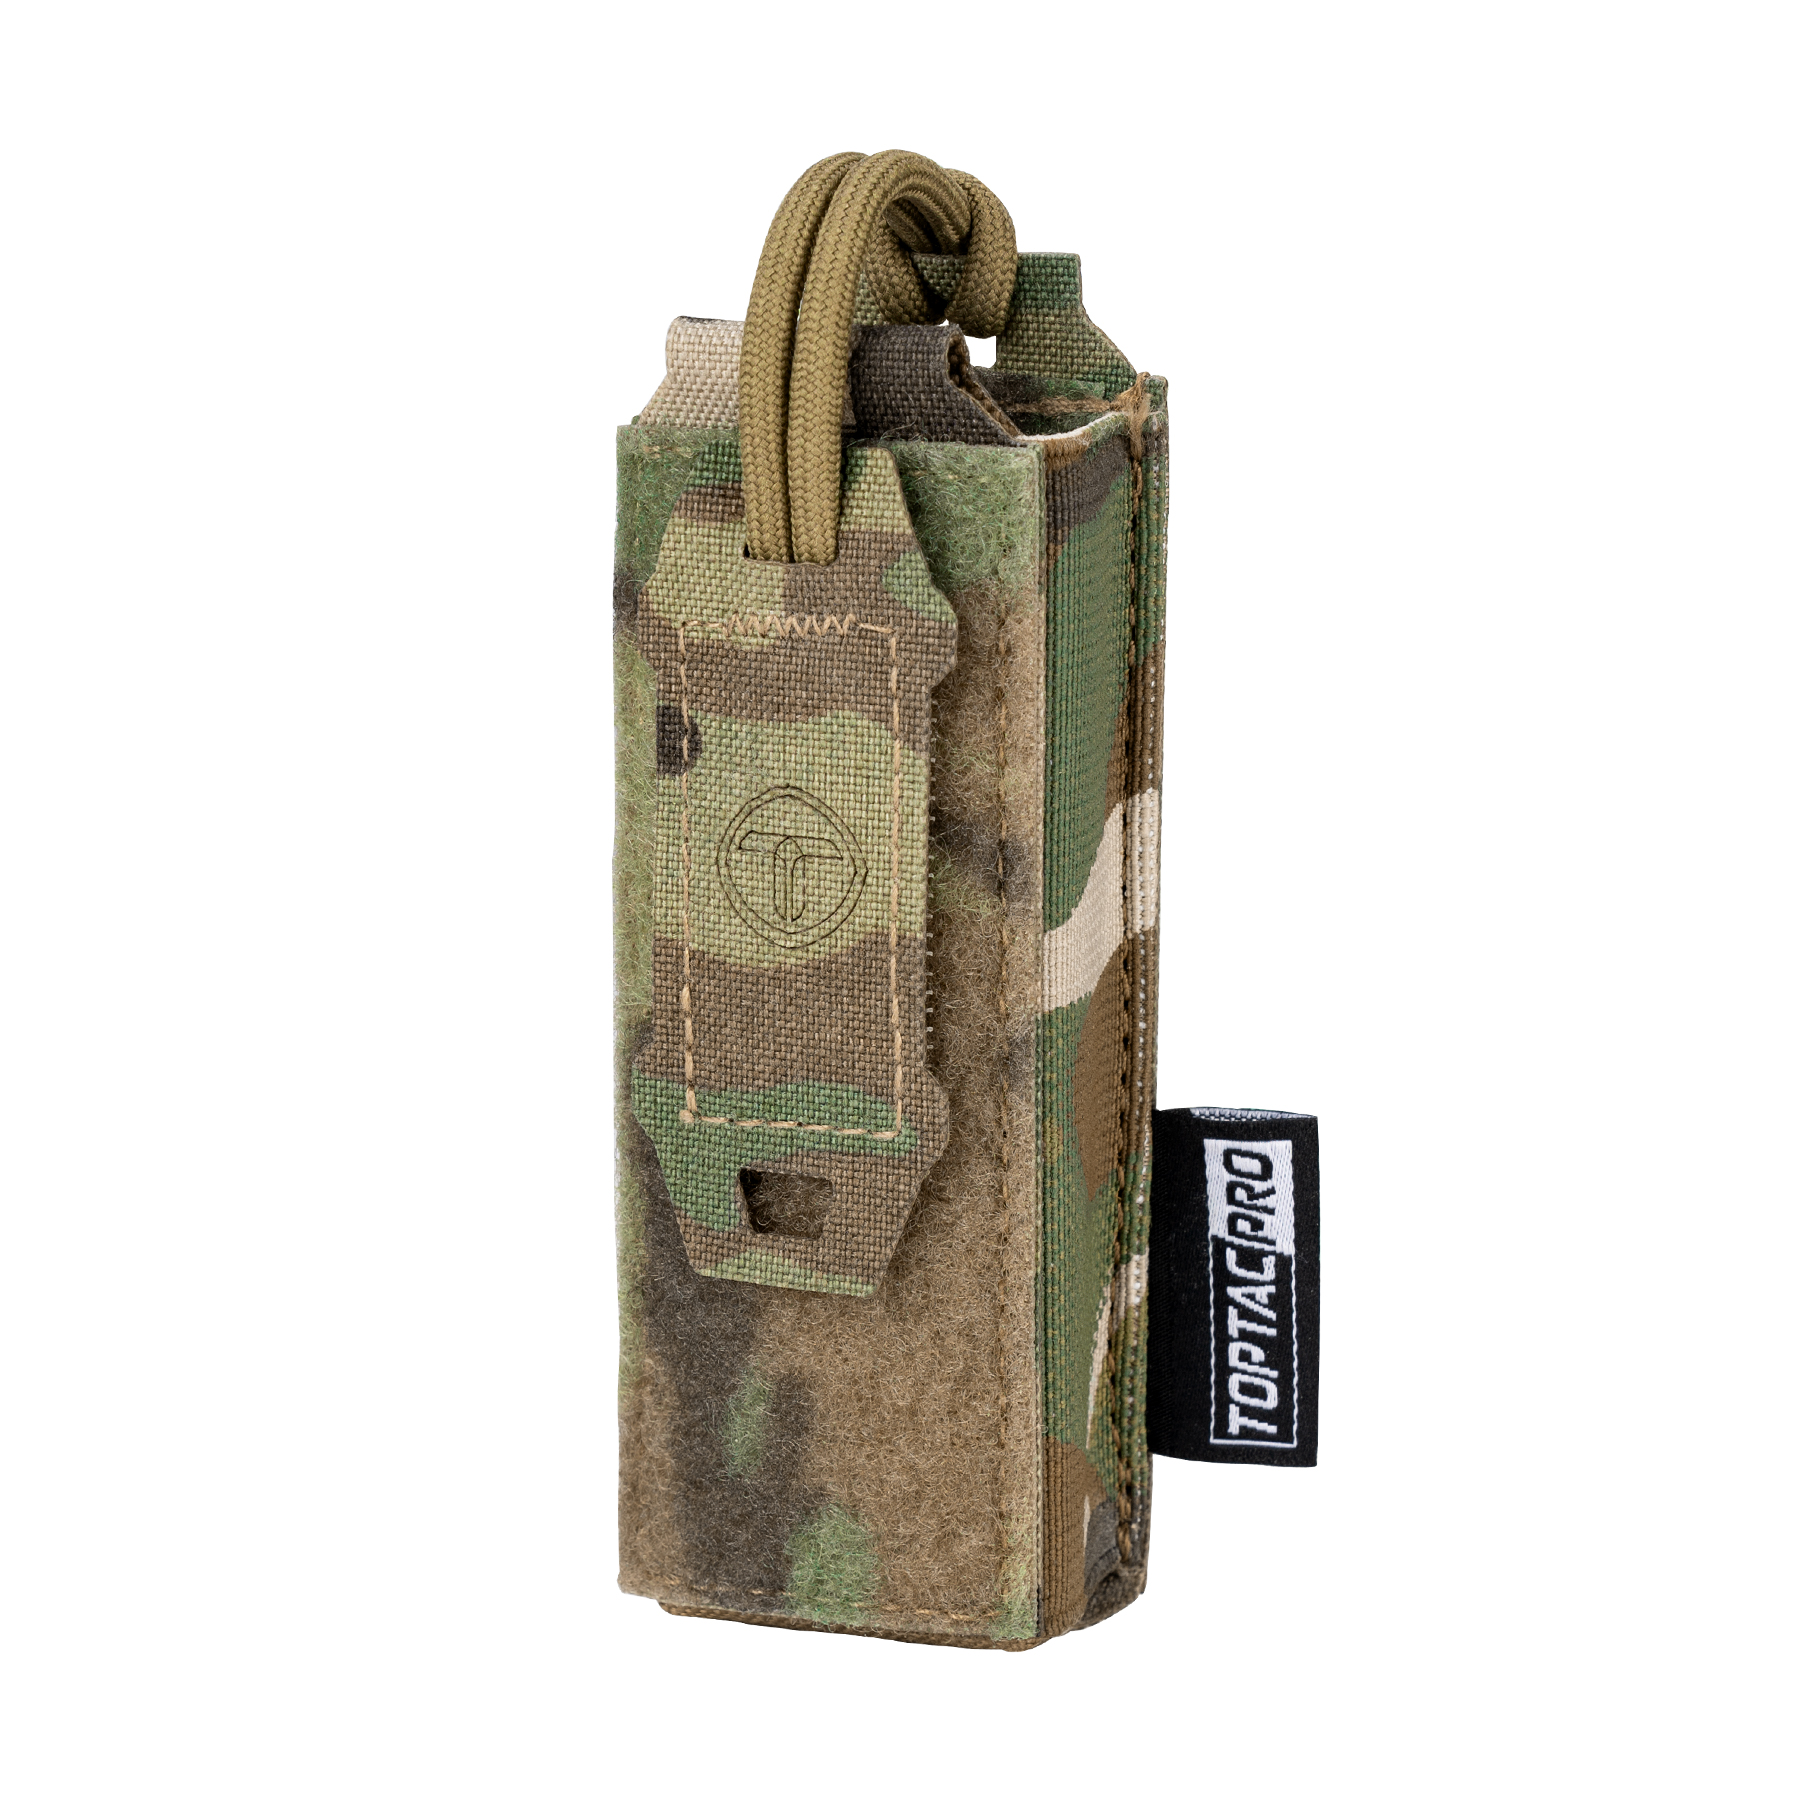 TOPTACPRO Tactical 9mm Mag Pouch MOLLE Pouch With Hook Handle  8516-IDOGEAR INDUSTRIAL